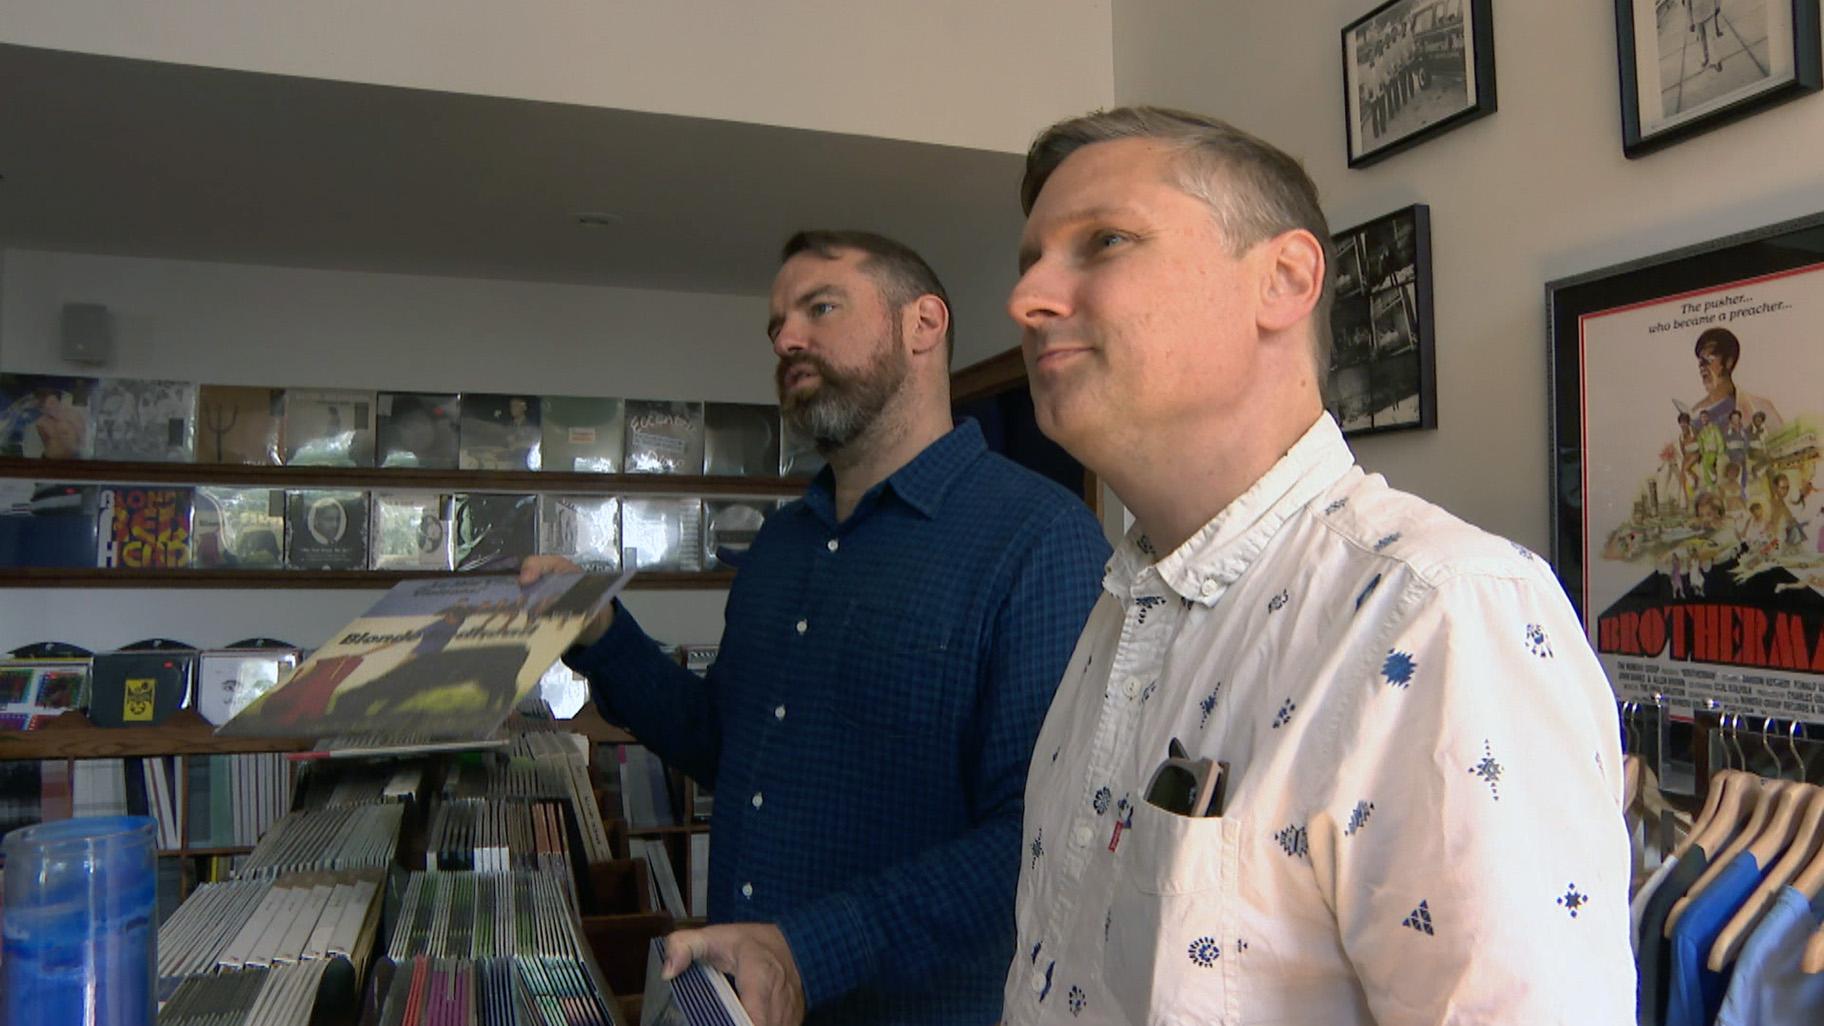 Numero Group co-founders Rob Sevier, left, and Ken Shipley, right, in their record label's shop on July 29, 2021. (WTTW News)